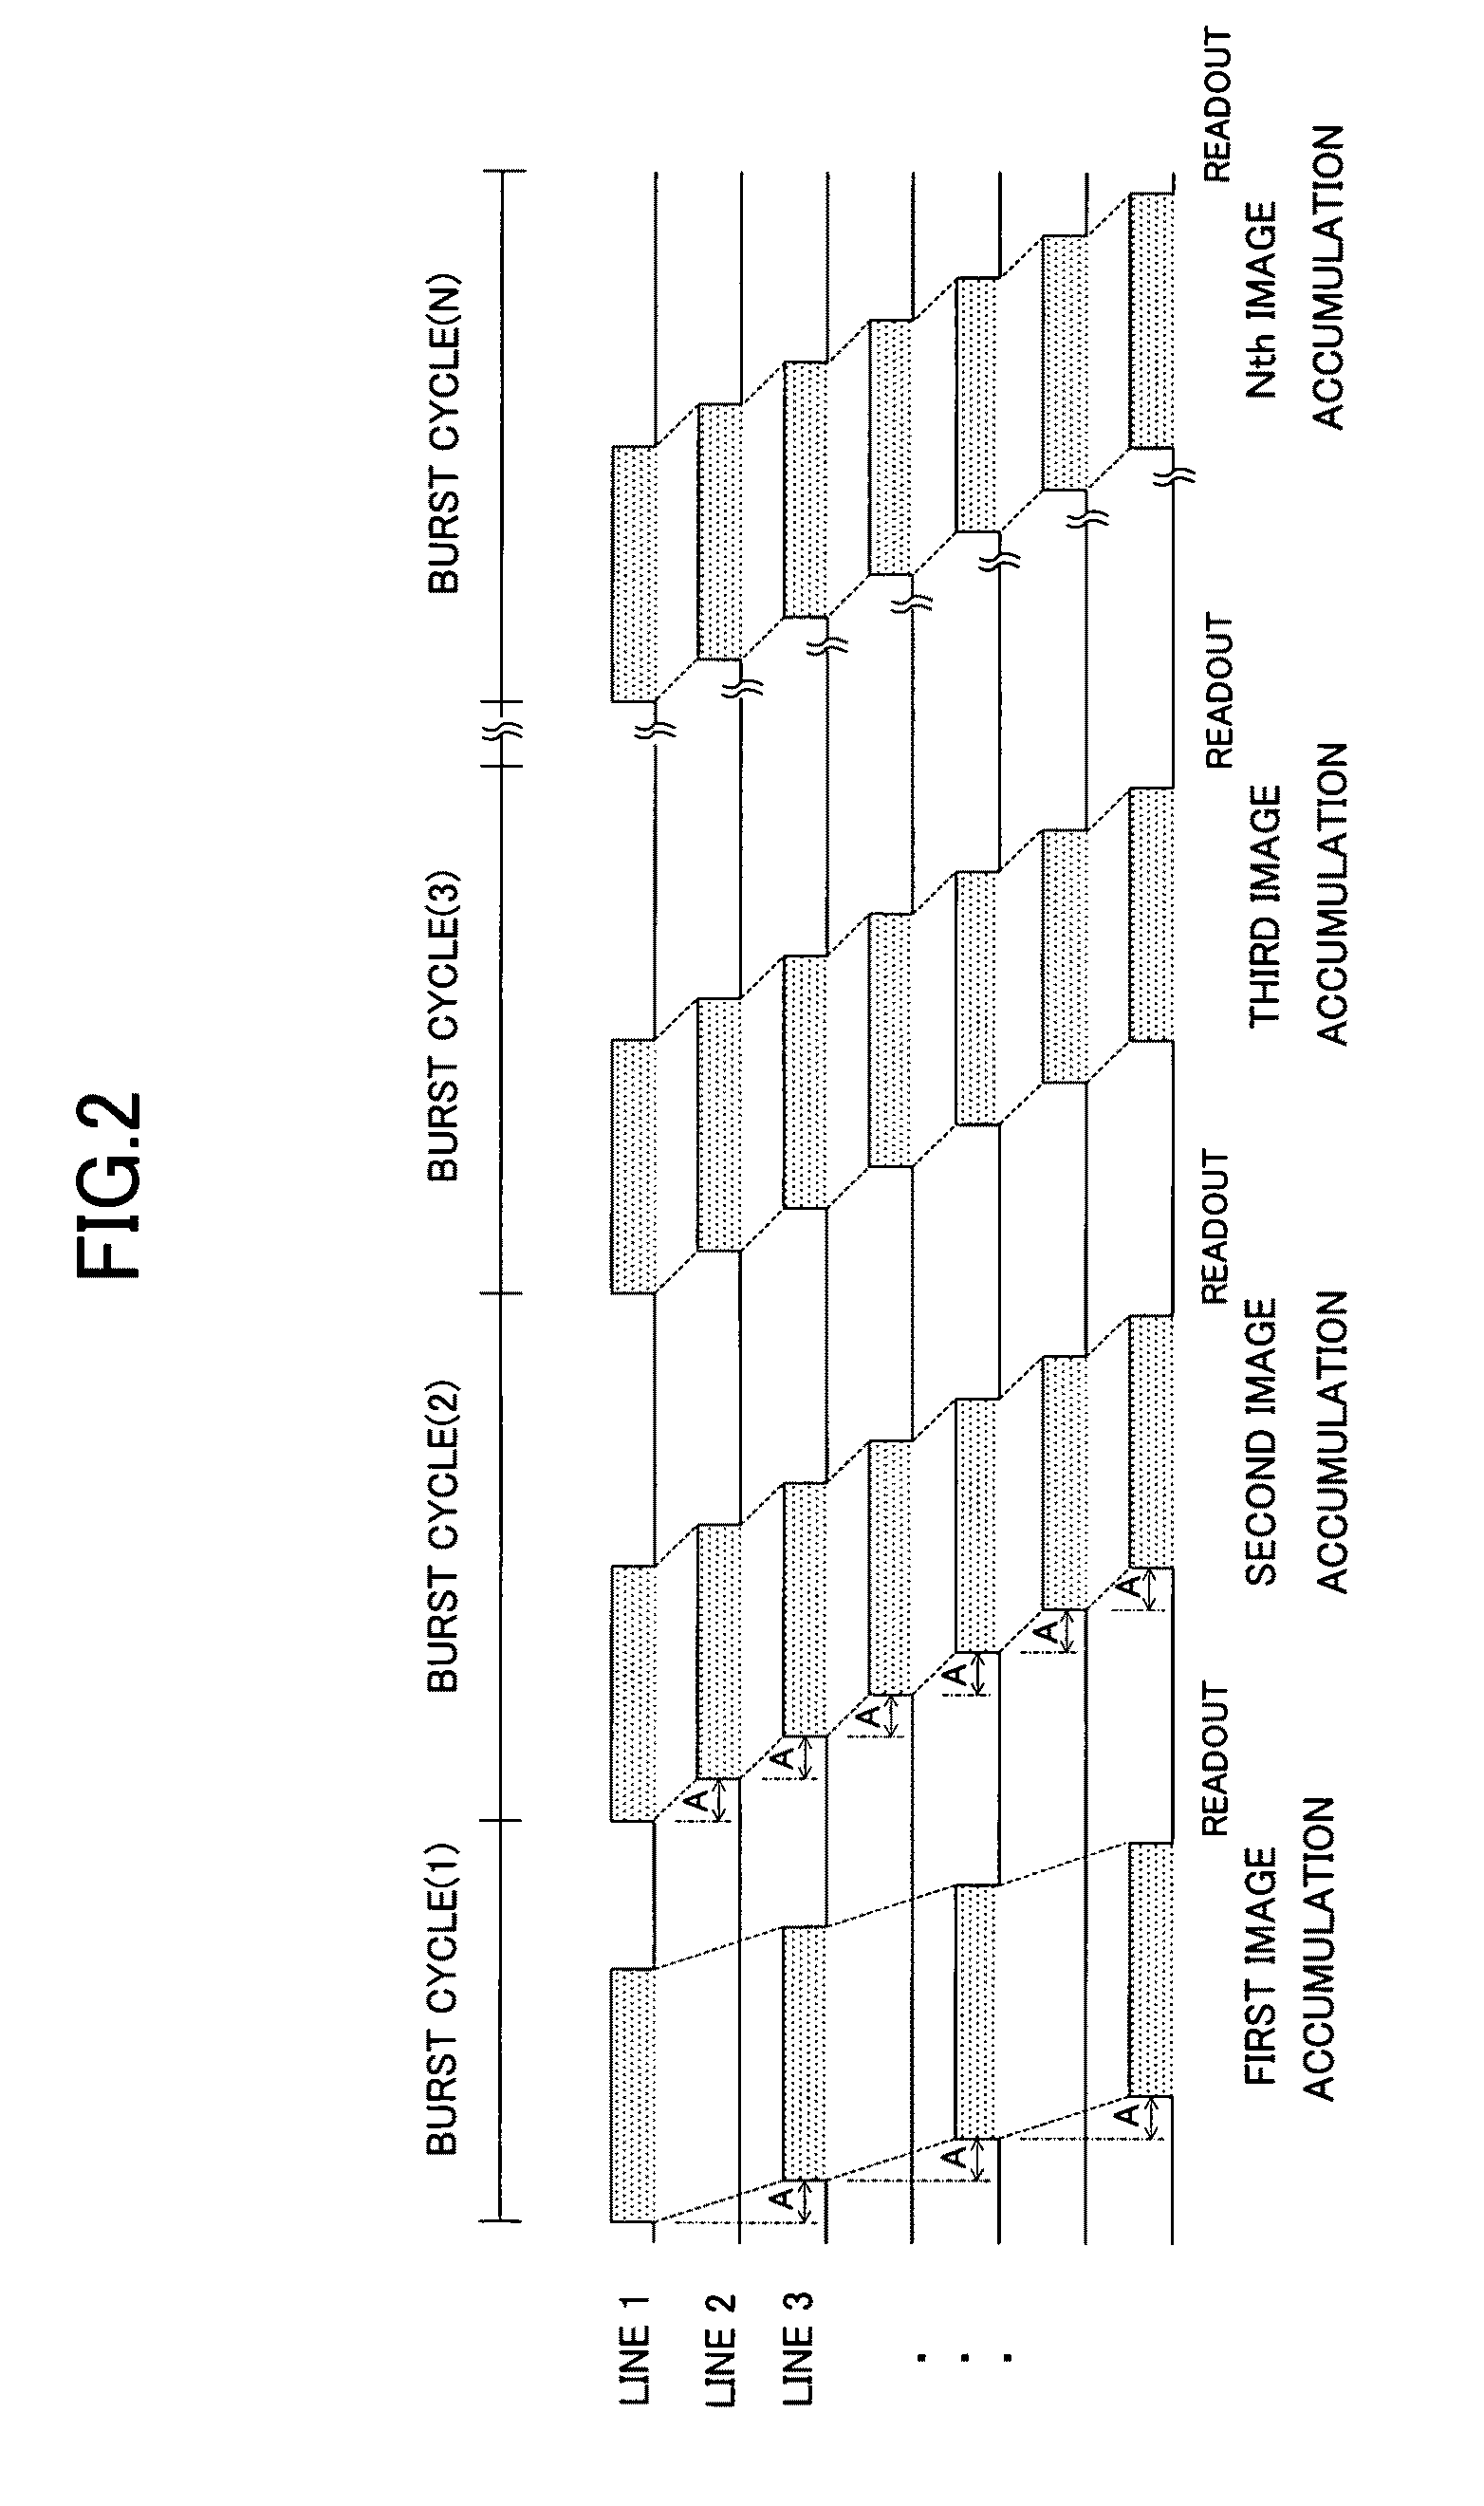 Method and apparatus for capturing an image